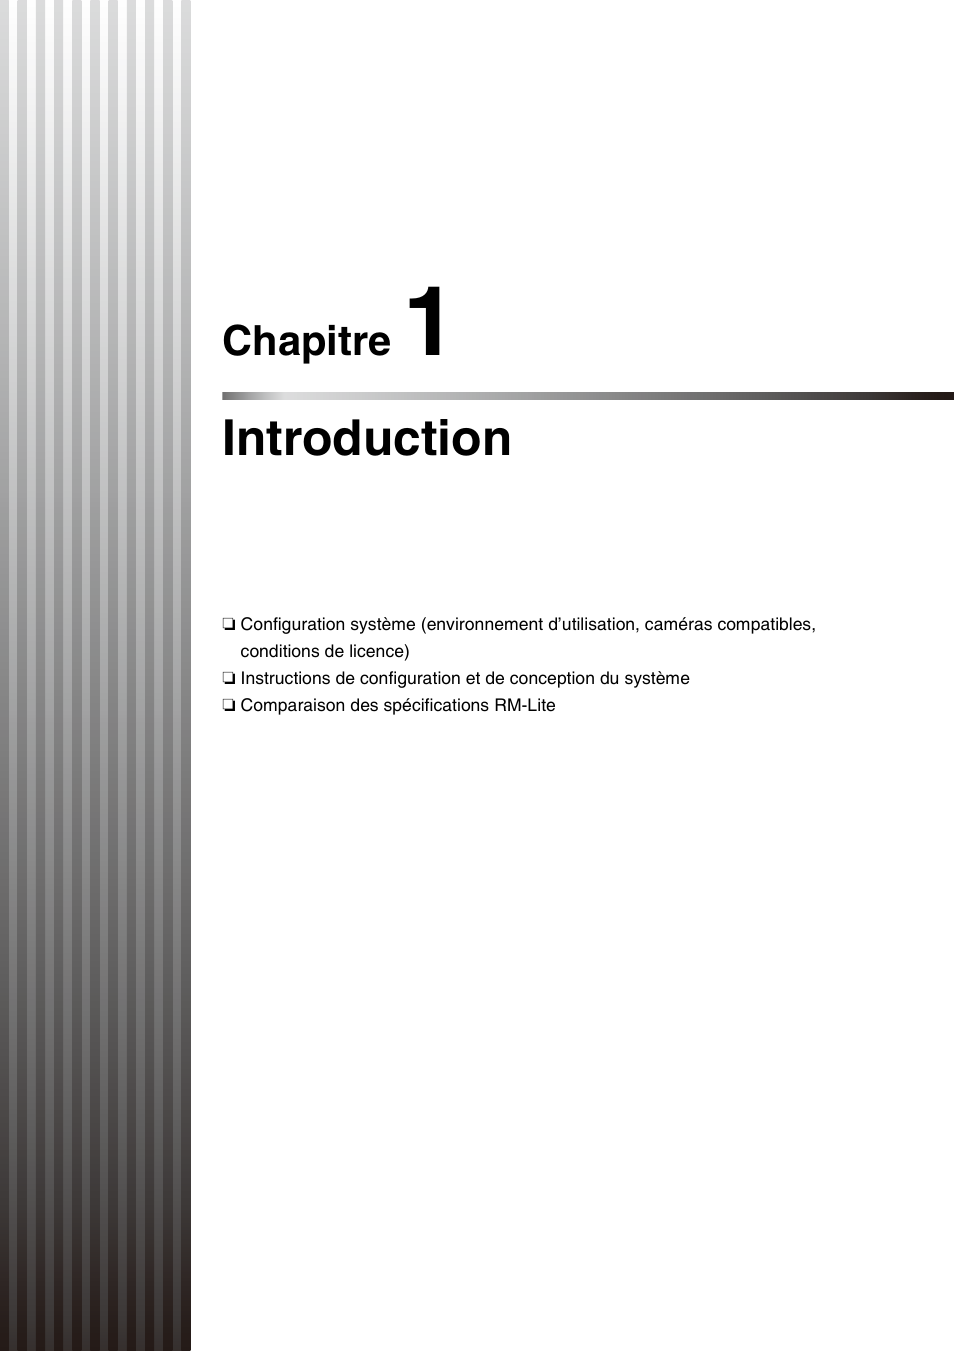 Chapitre 1 introduction, Chapitre 1: introduction, Chapitre | Introduction | Canon VB-H610D Manuel d'utilisation | Page 13 / 138